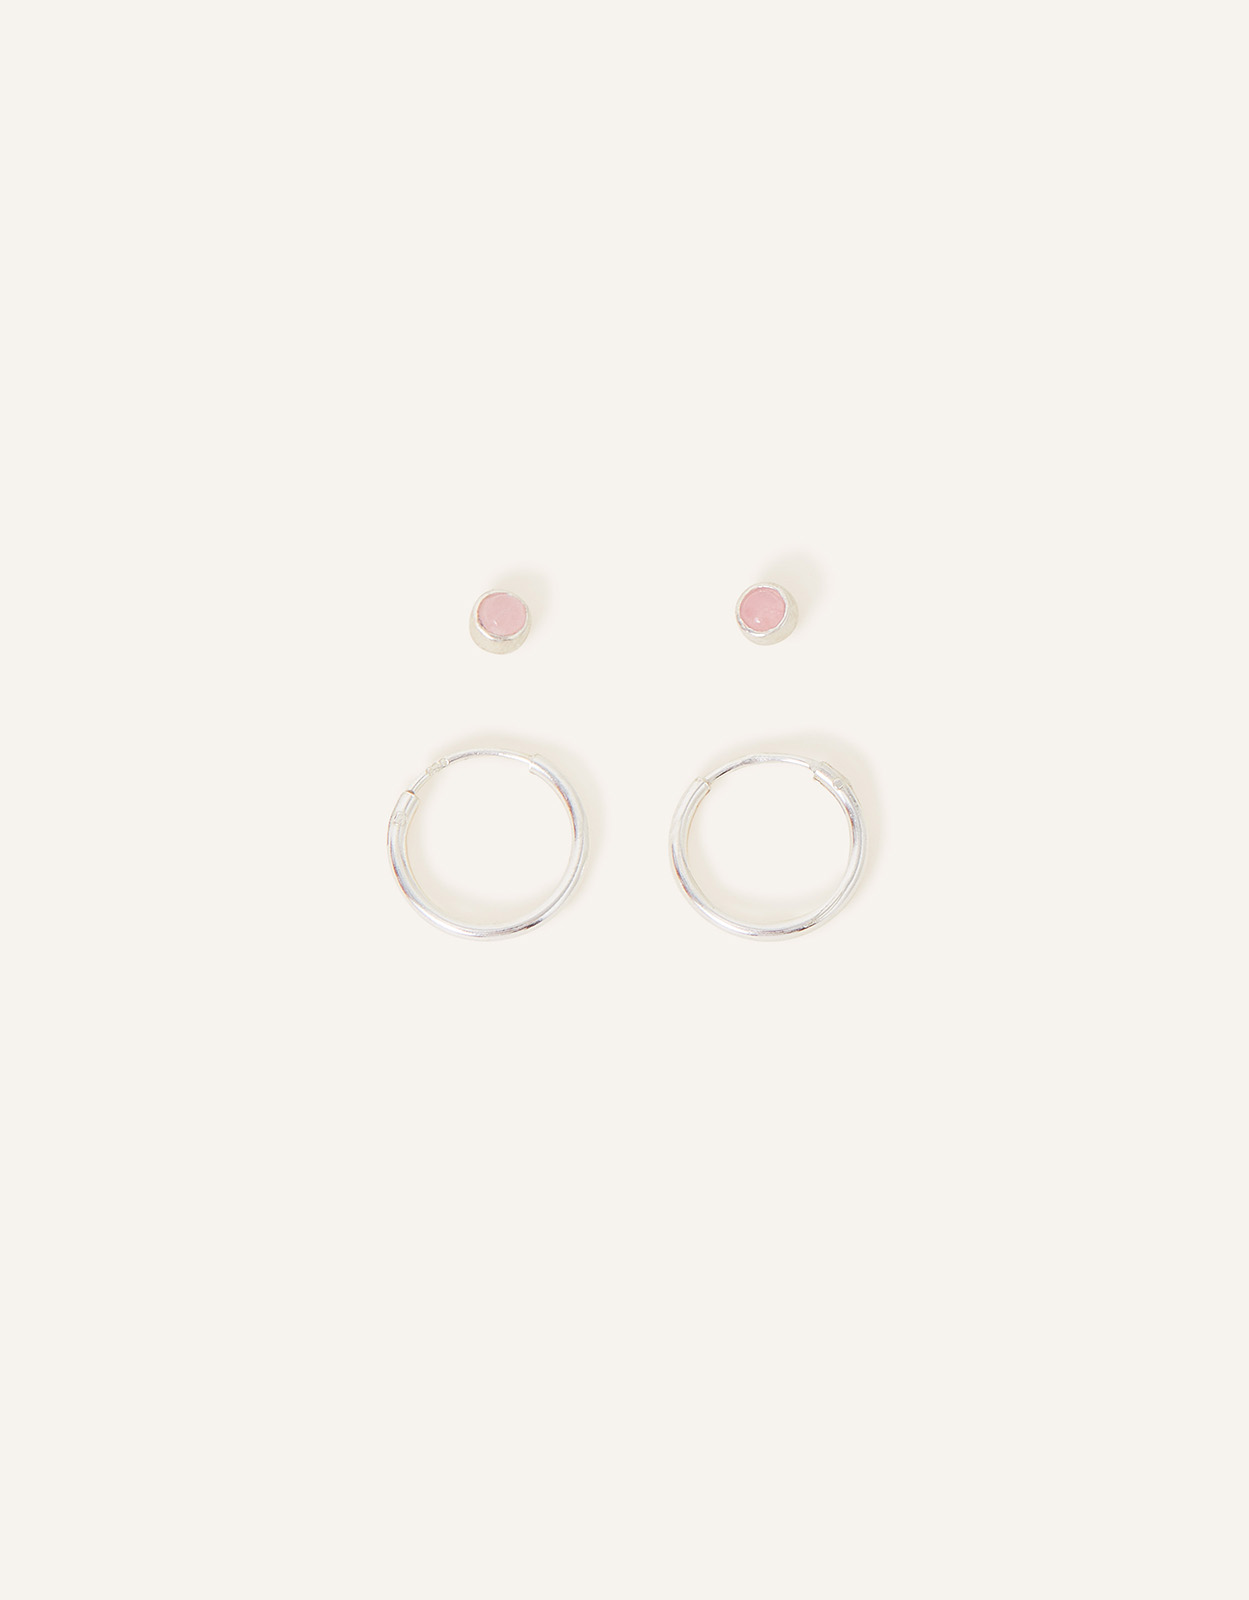 Accessorize Women's Pink and Sterling Silver Set of Two Rose Quartz Stud Hoops, Size: 0.5cm